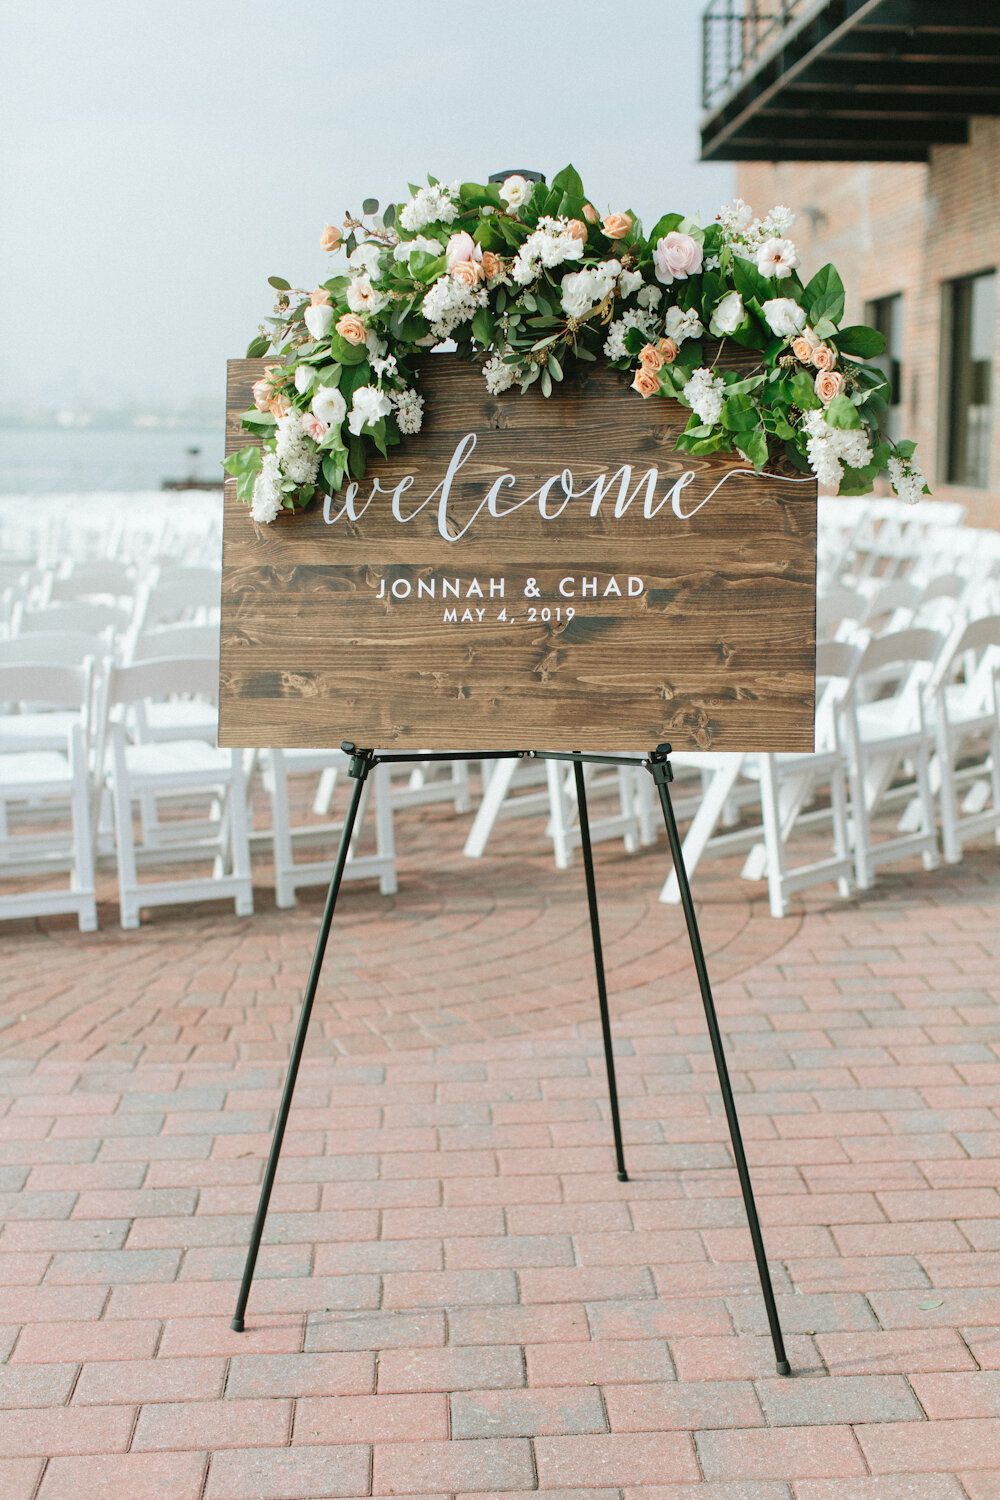 wedding welcome sign with flowers.jpg